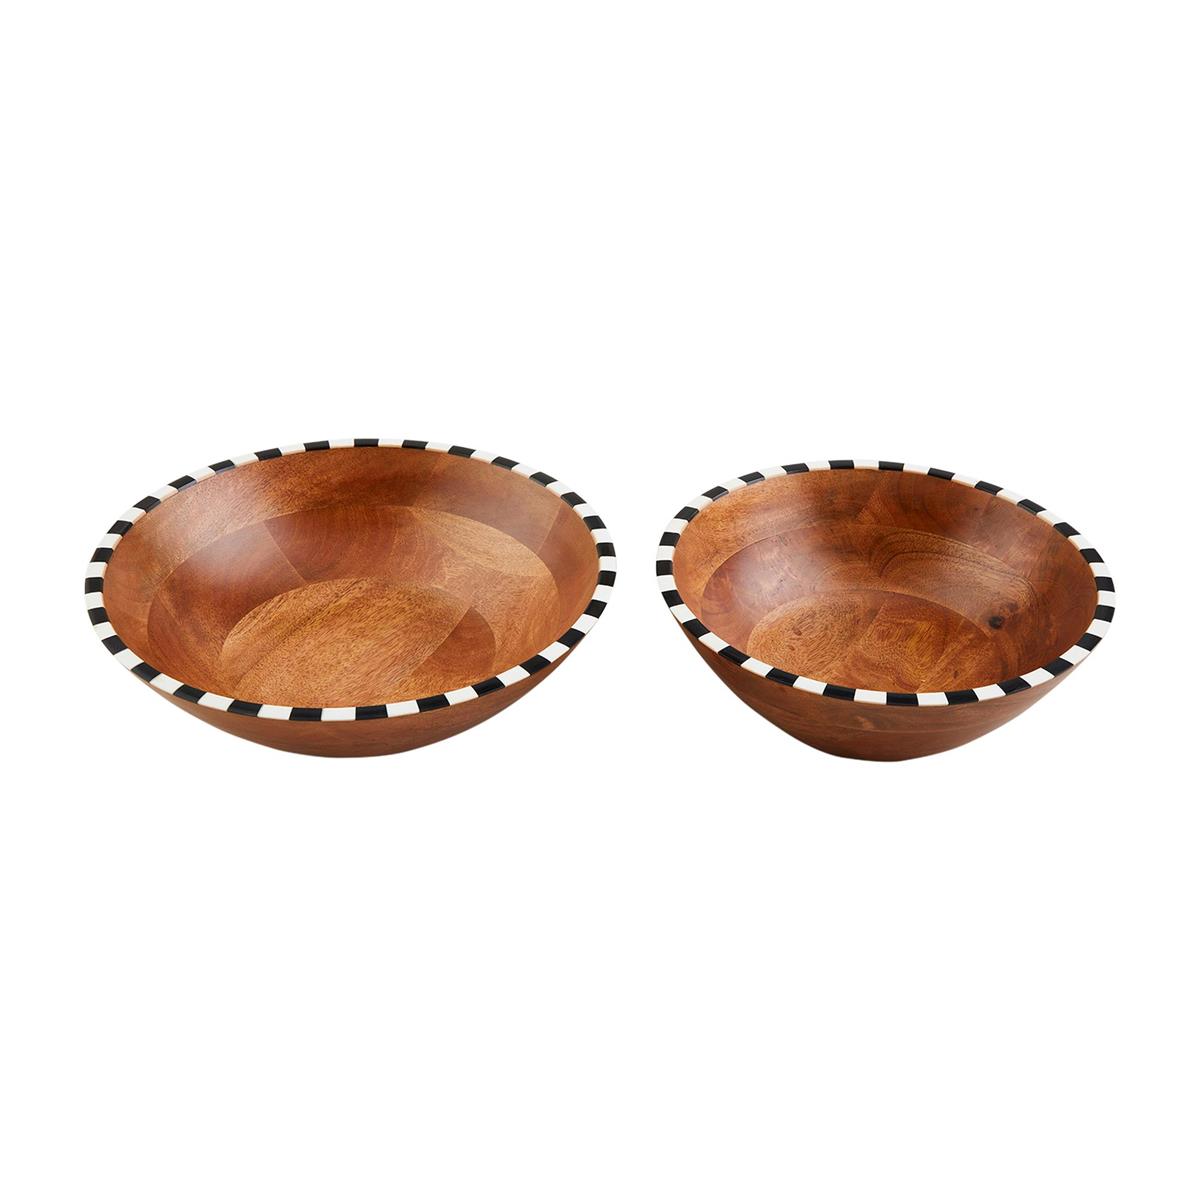 2 sizes of wooden bowls with black and white rims on a white background.